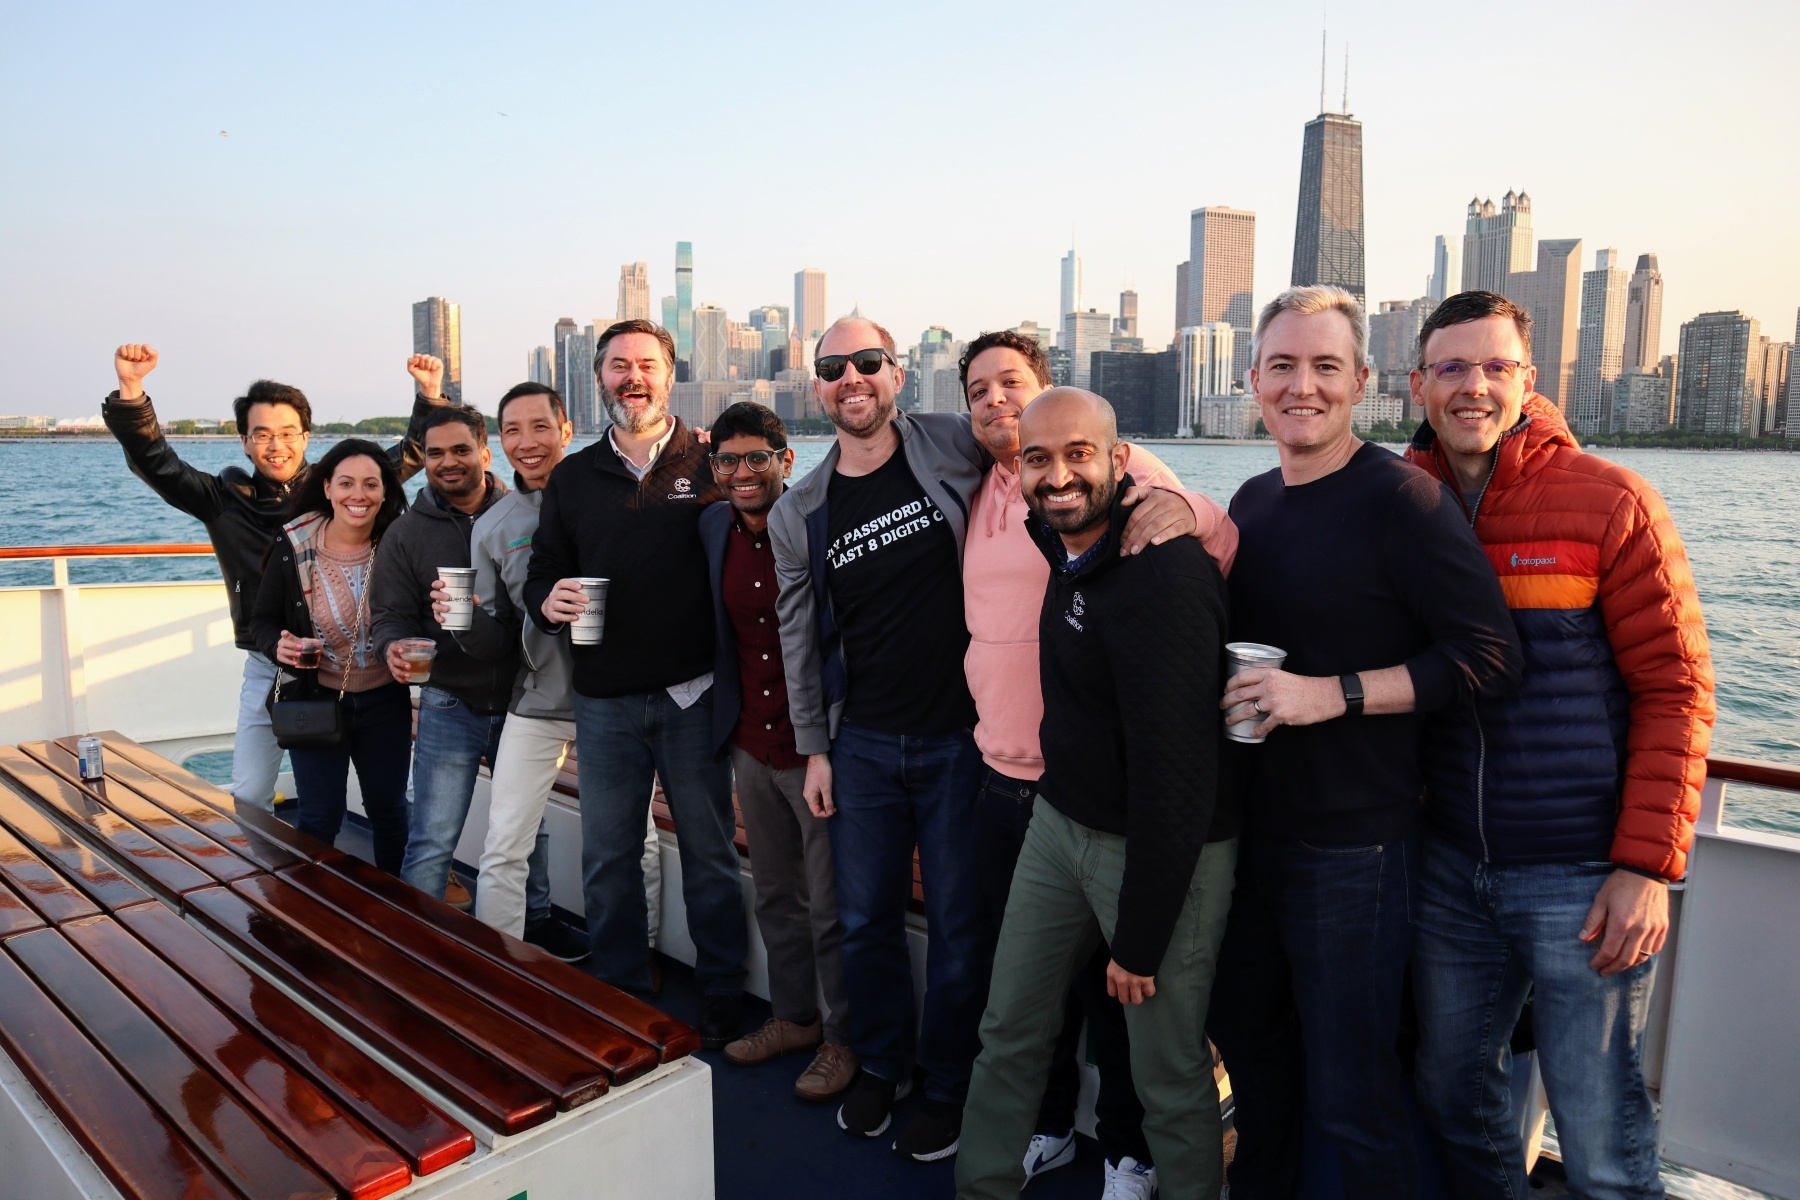 Coalition employees on a fun, group outing on a boat in the Chicago lakefront.